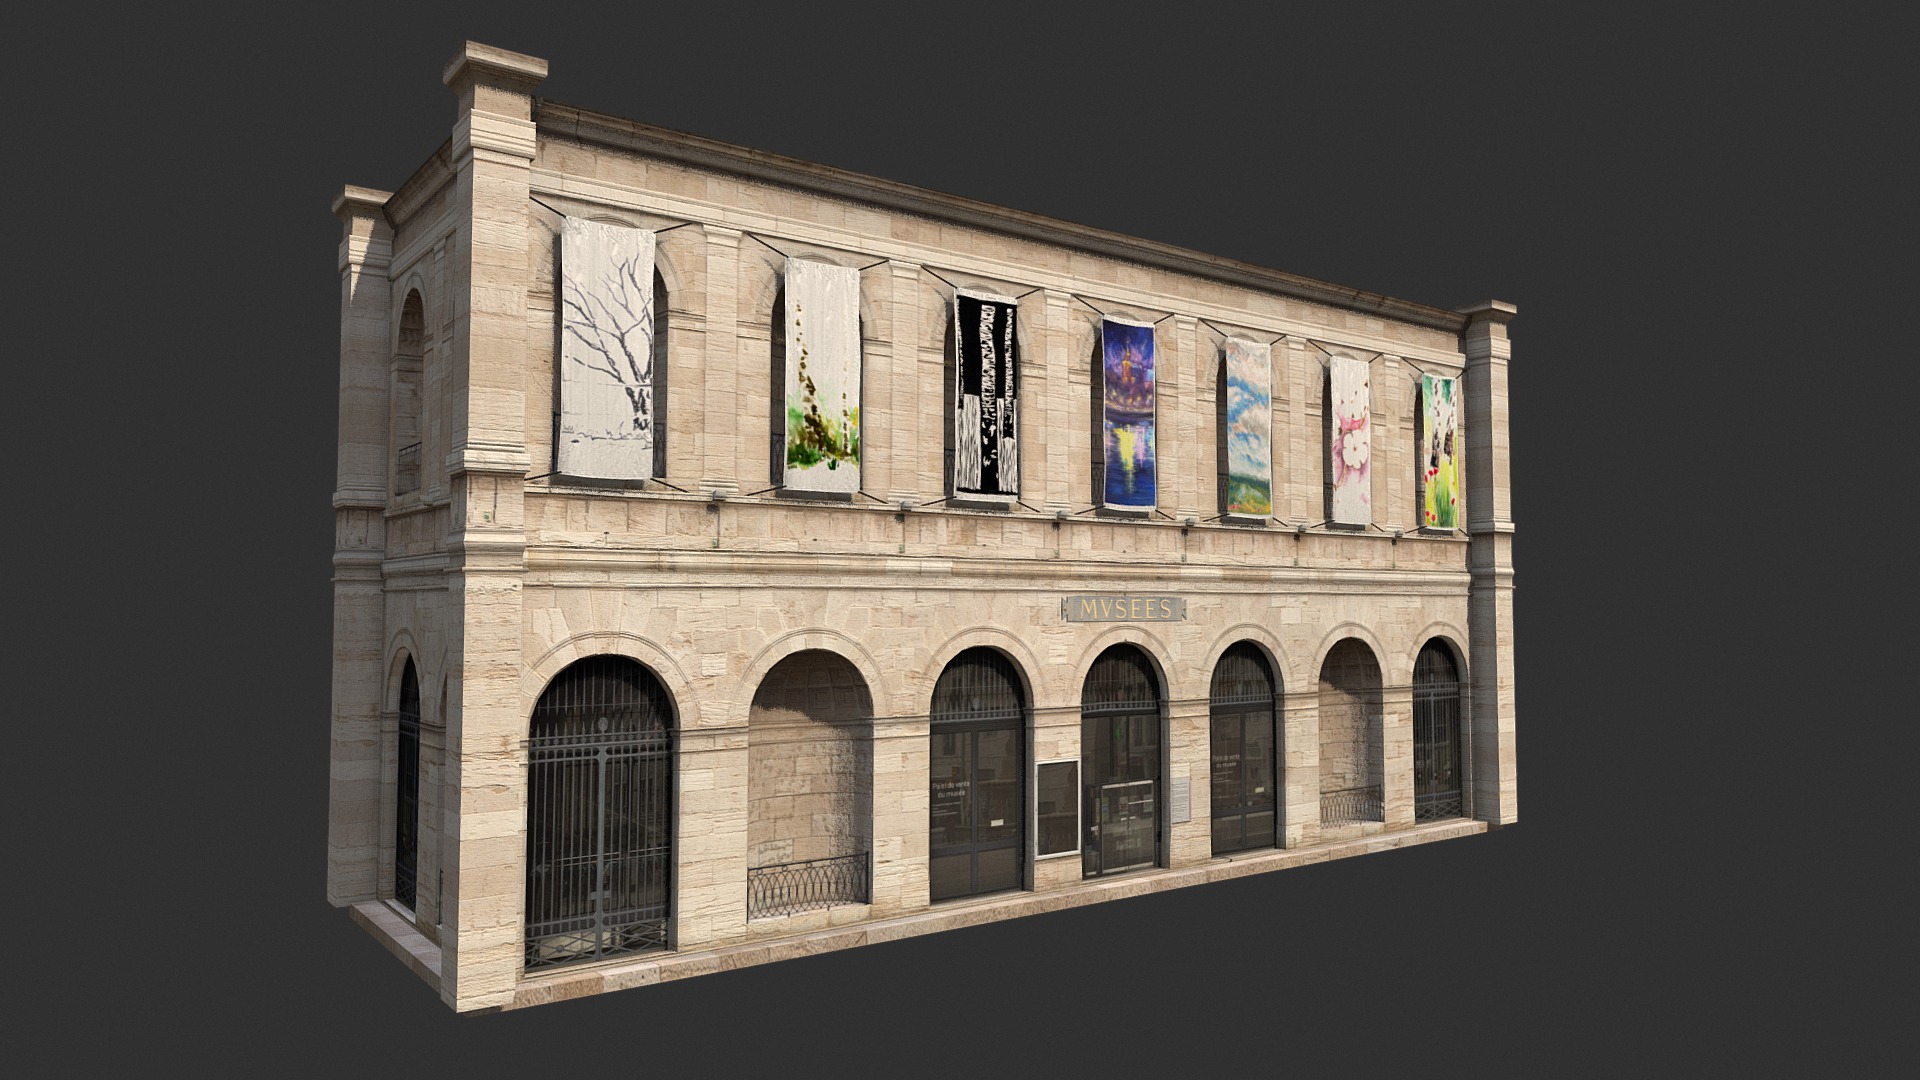 3D model Gallery or Museum Low Poly 3d Model - This is a 3D model of the Gallery or Museum Low Poly 3d Model. The 3D model is about Mob Museum with many windows.